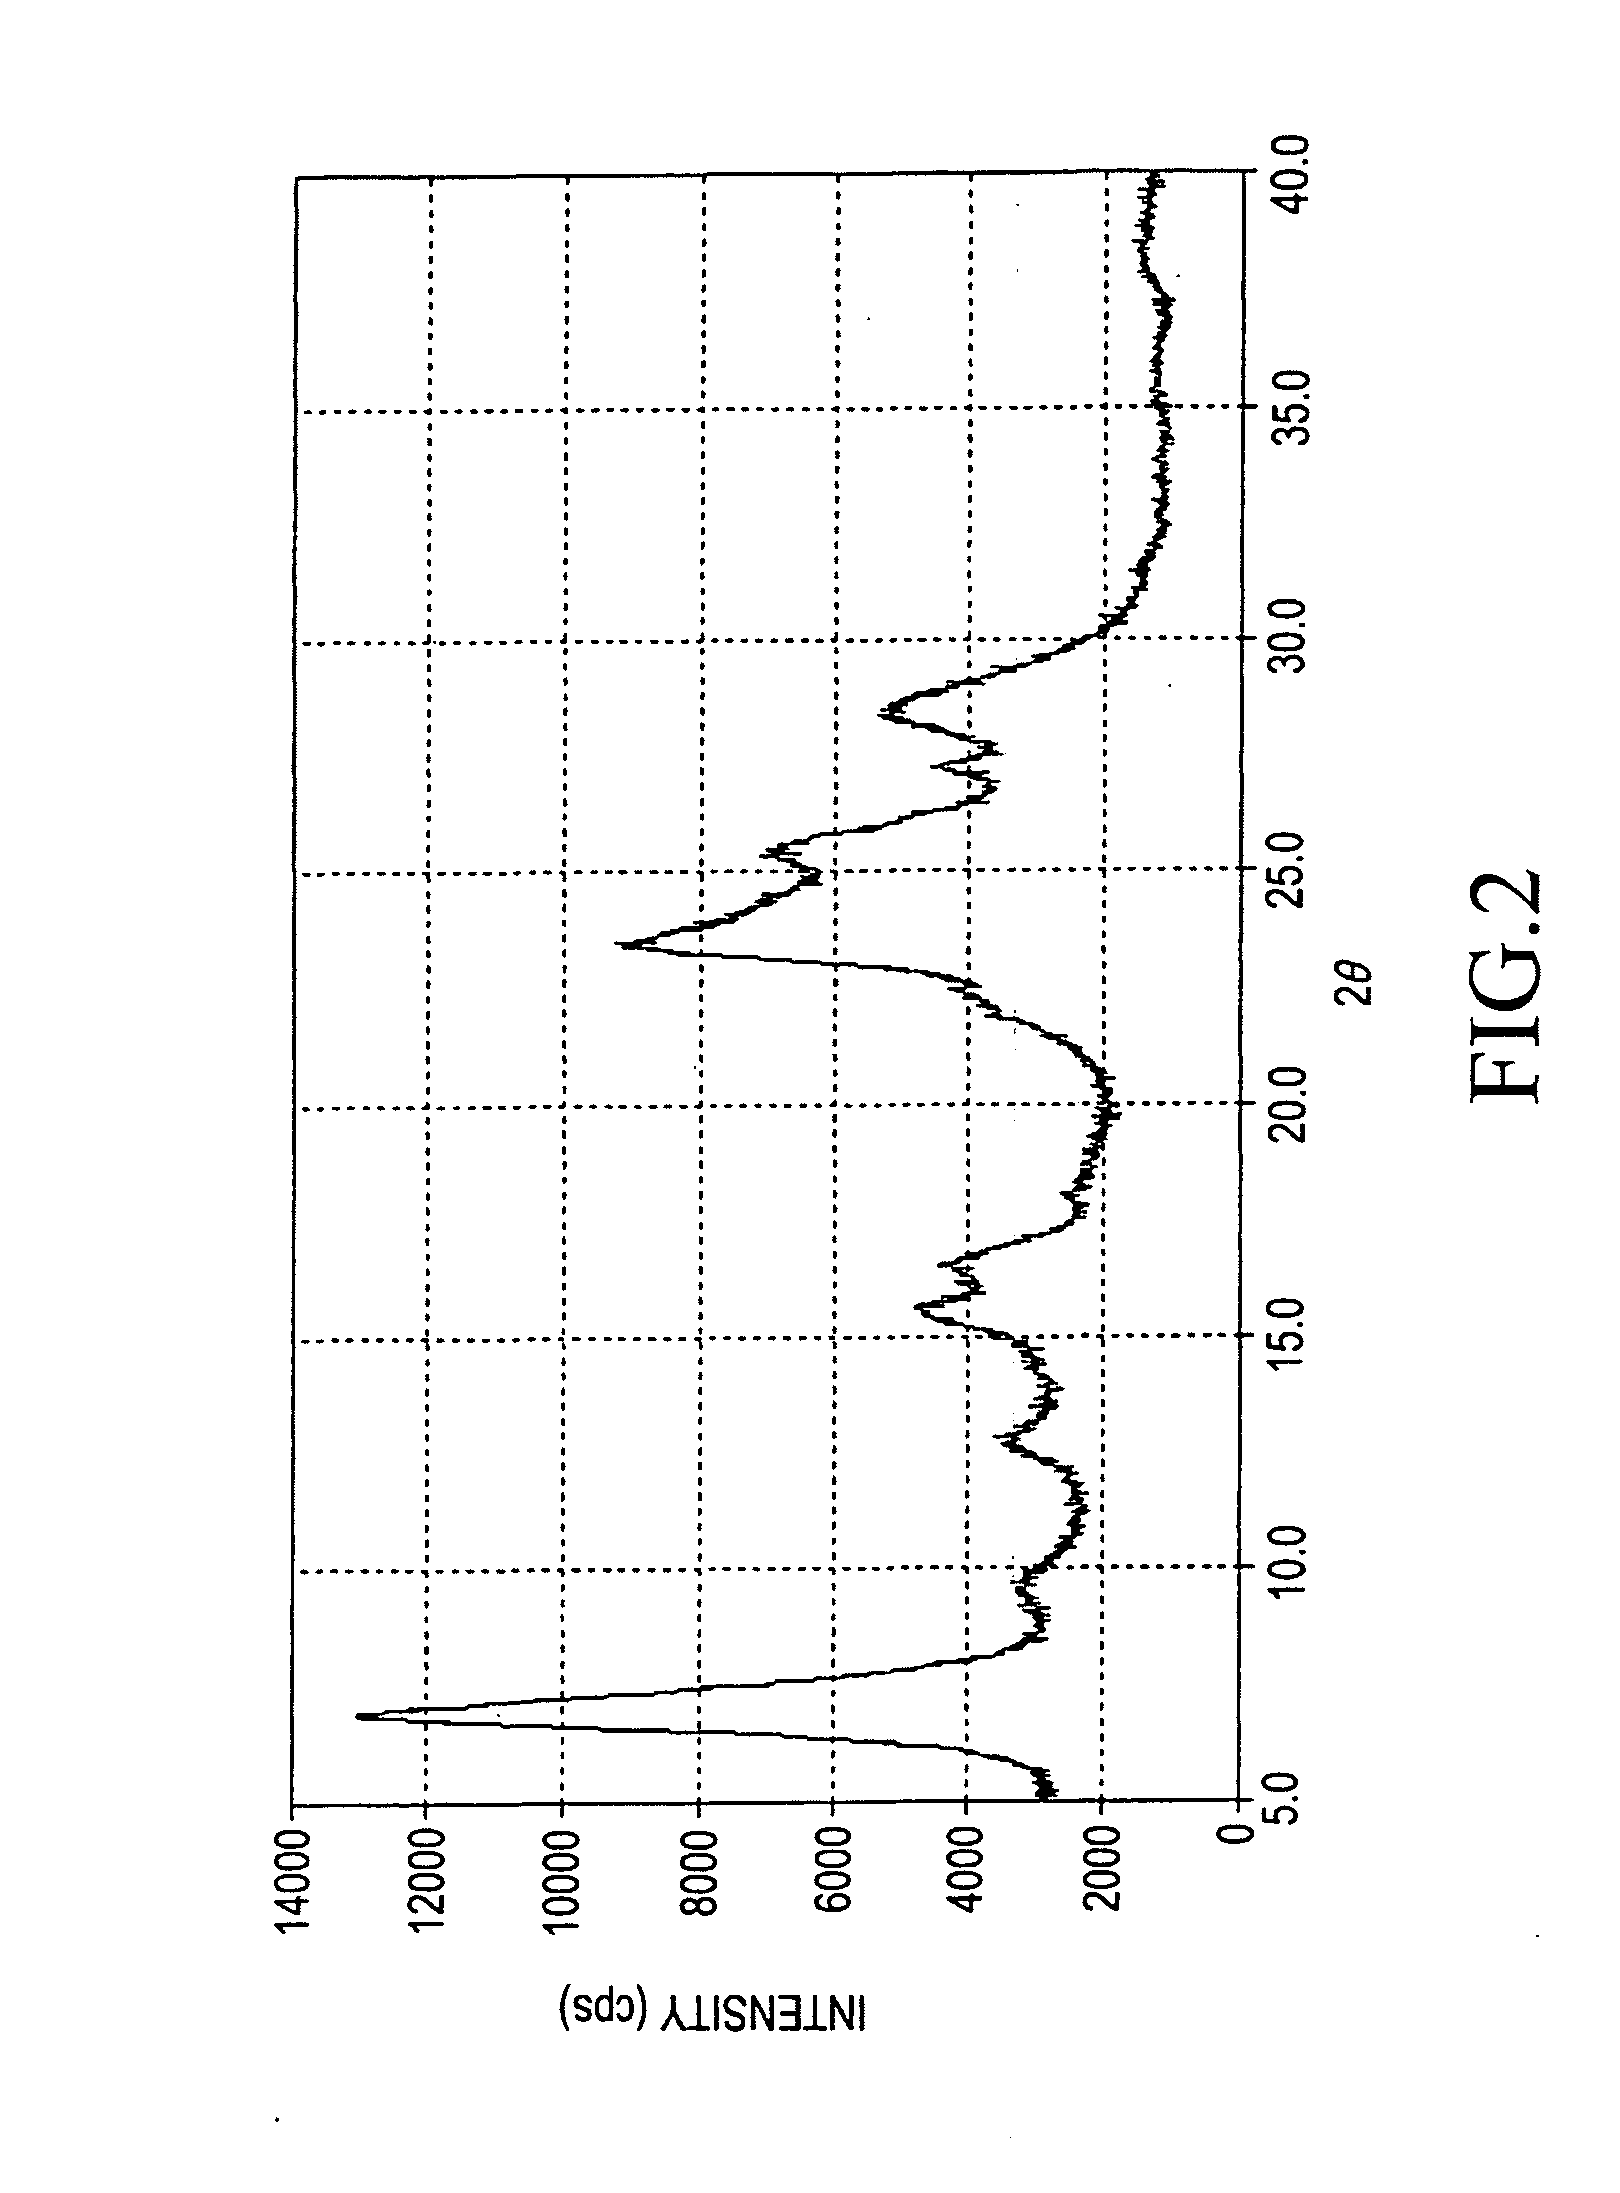 Titanylphthalocyanine comprising specific polymorph and method for producing thereof, and electrophotographic photoreceptor comprising charge generating material thereof